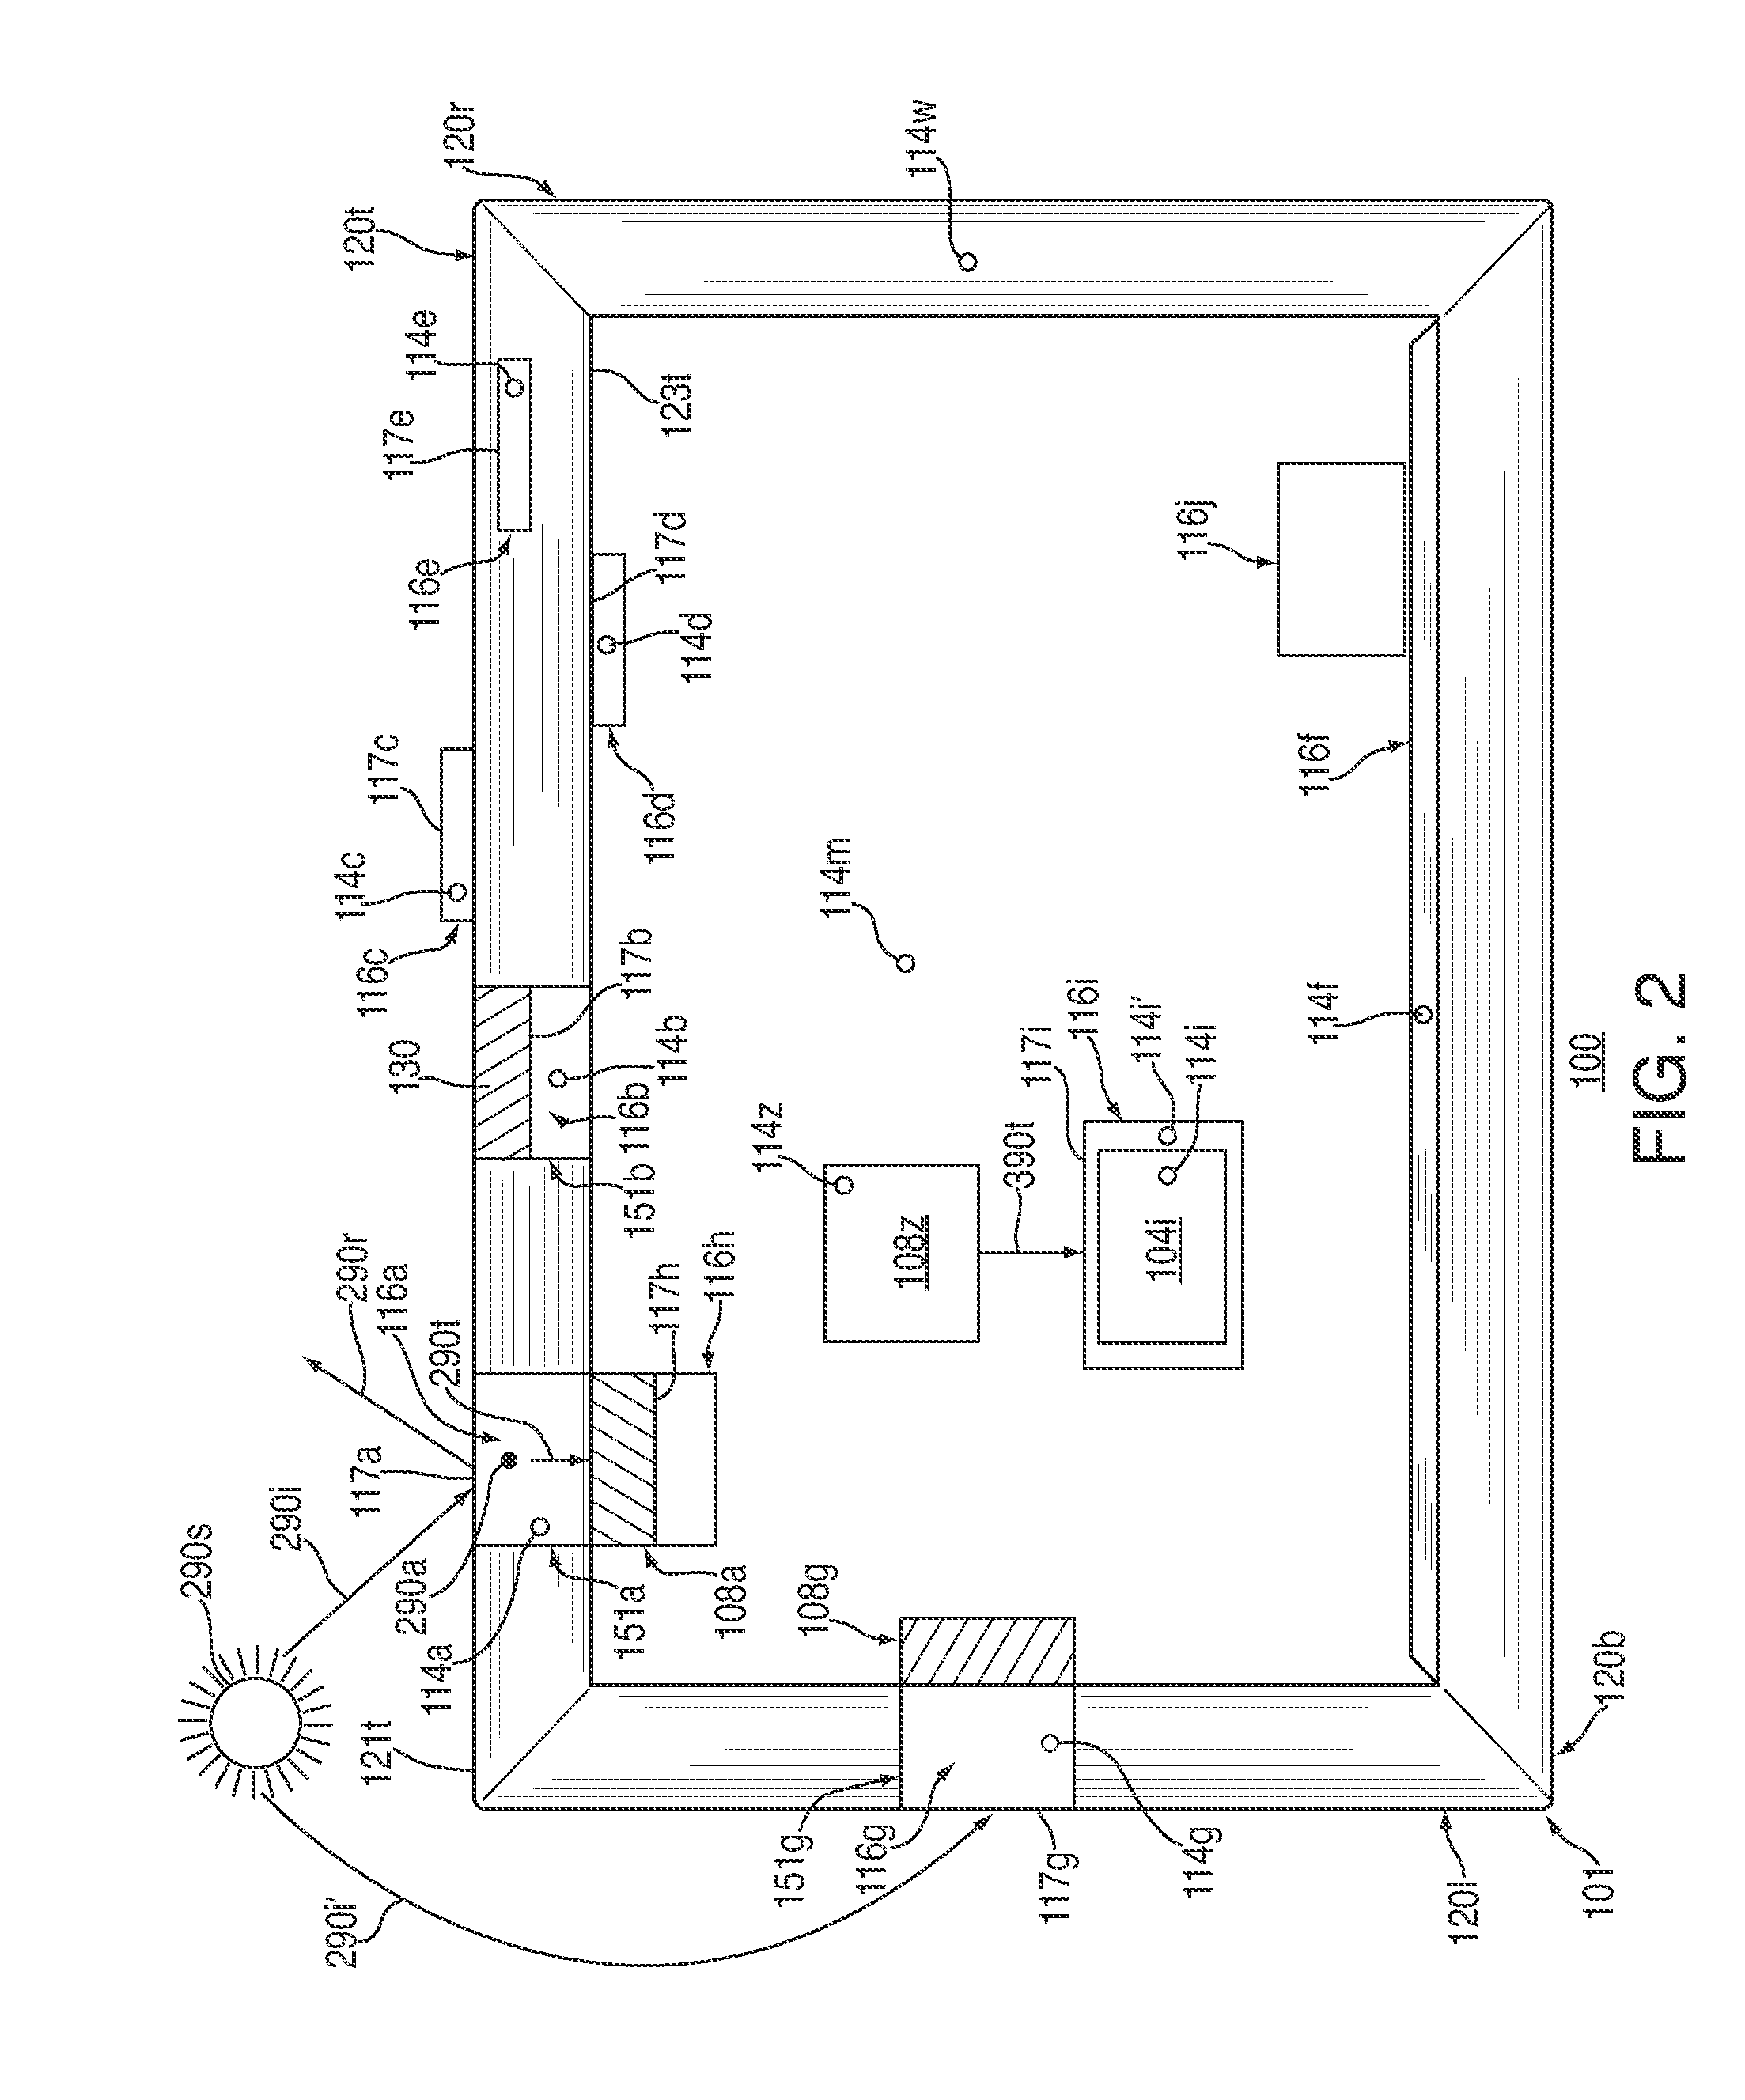 Systems, methods, and computer-readable media for thermally managing electronic devices using dynamic optical components